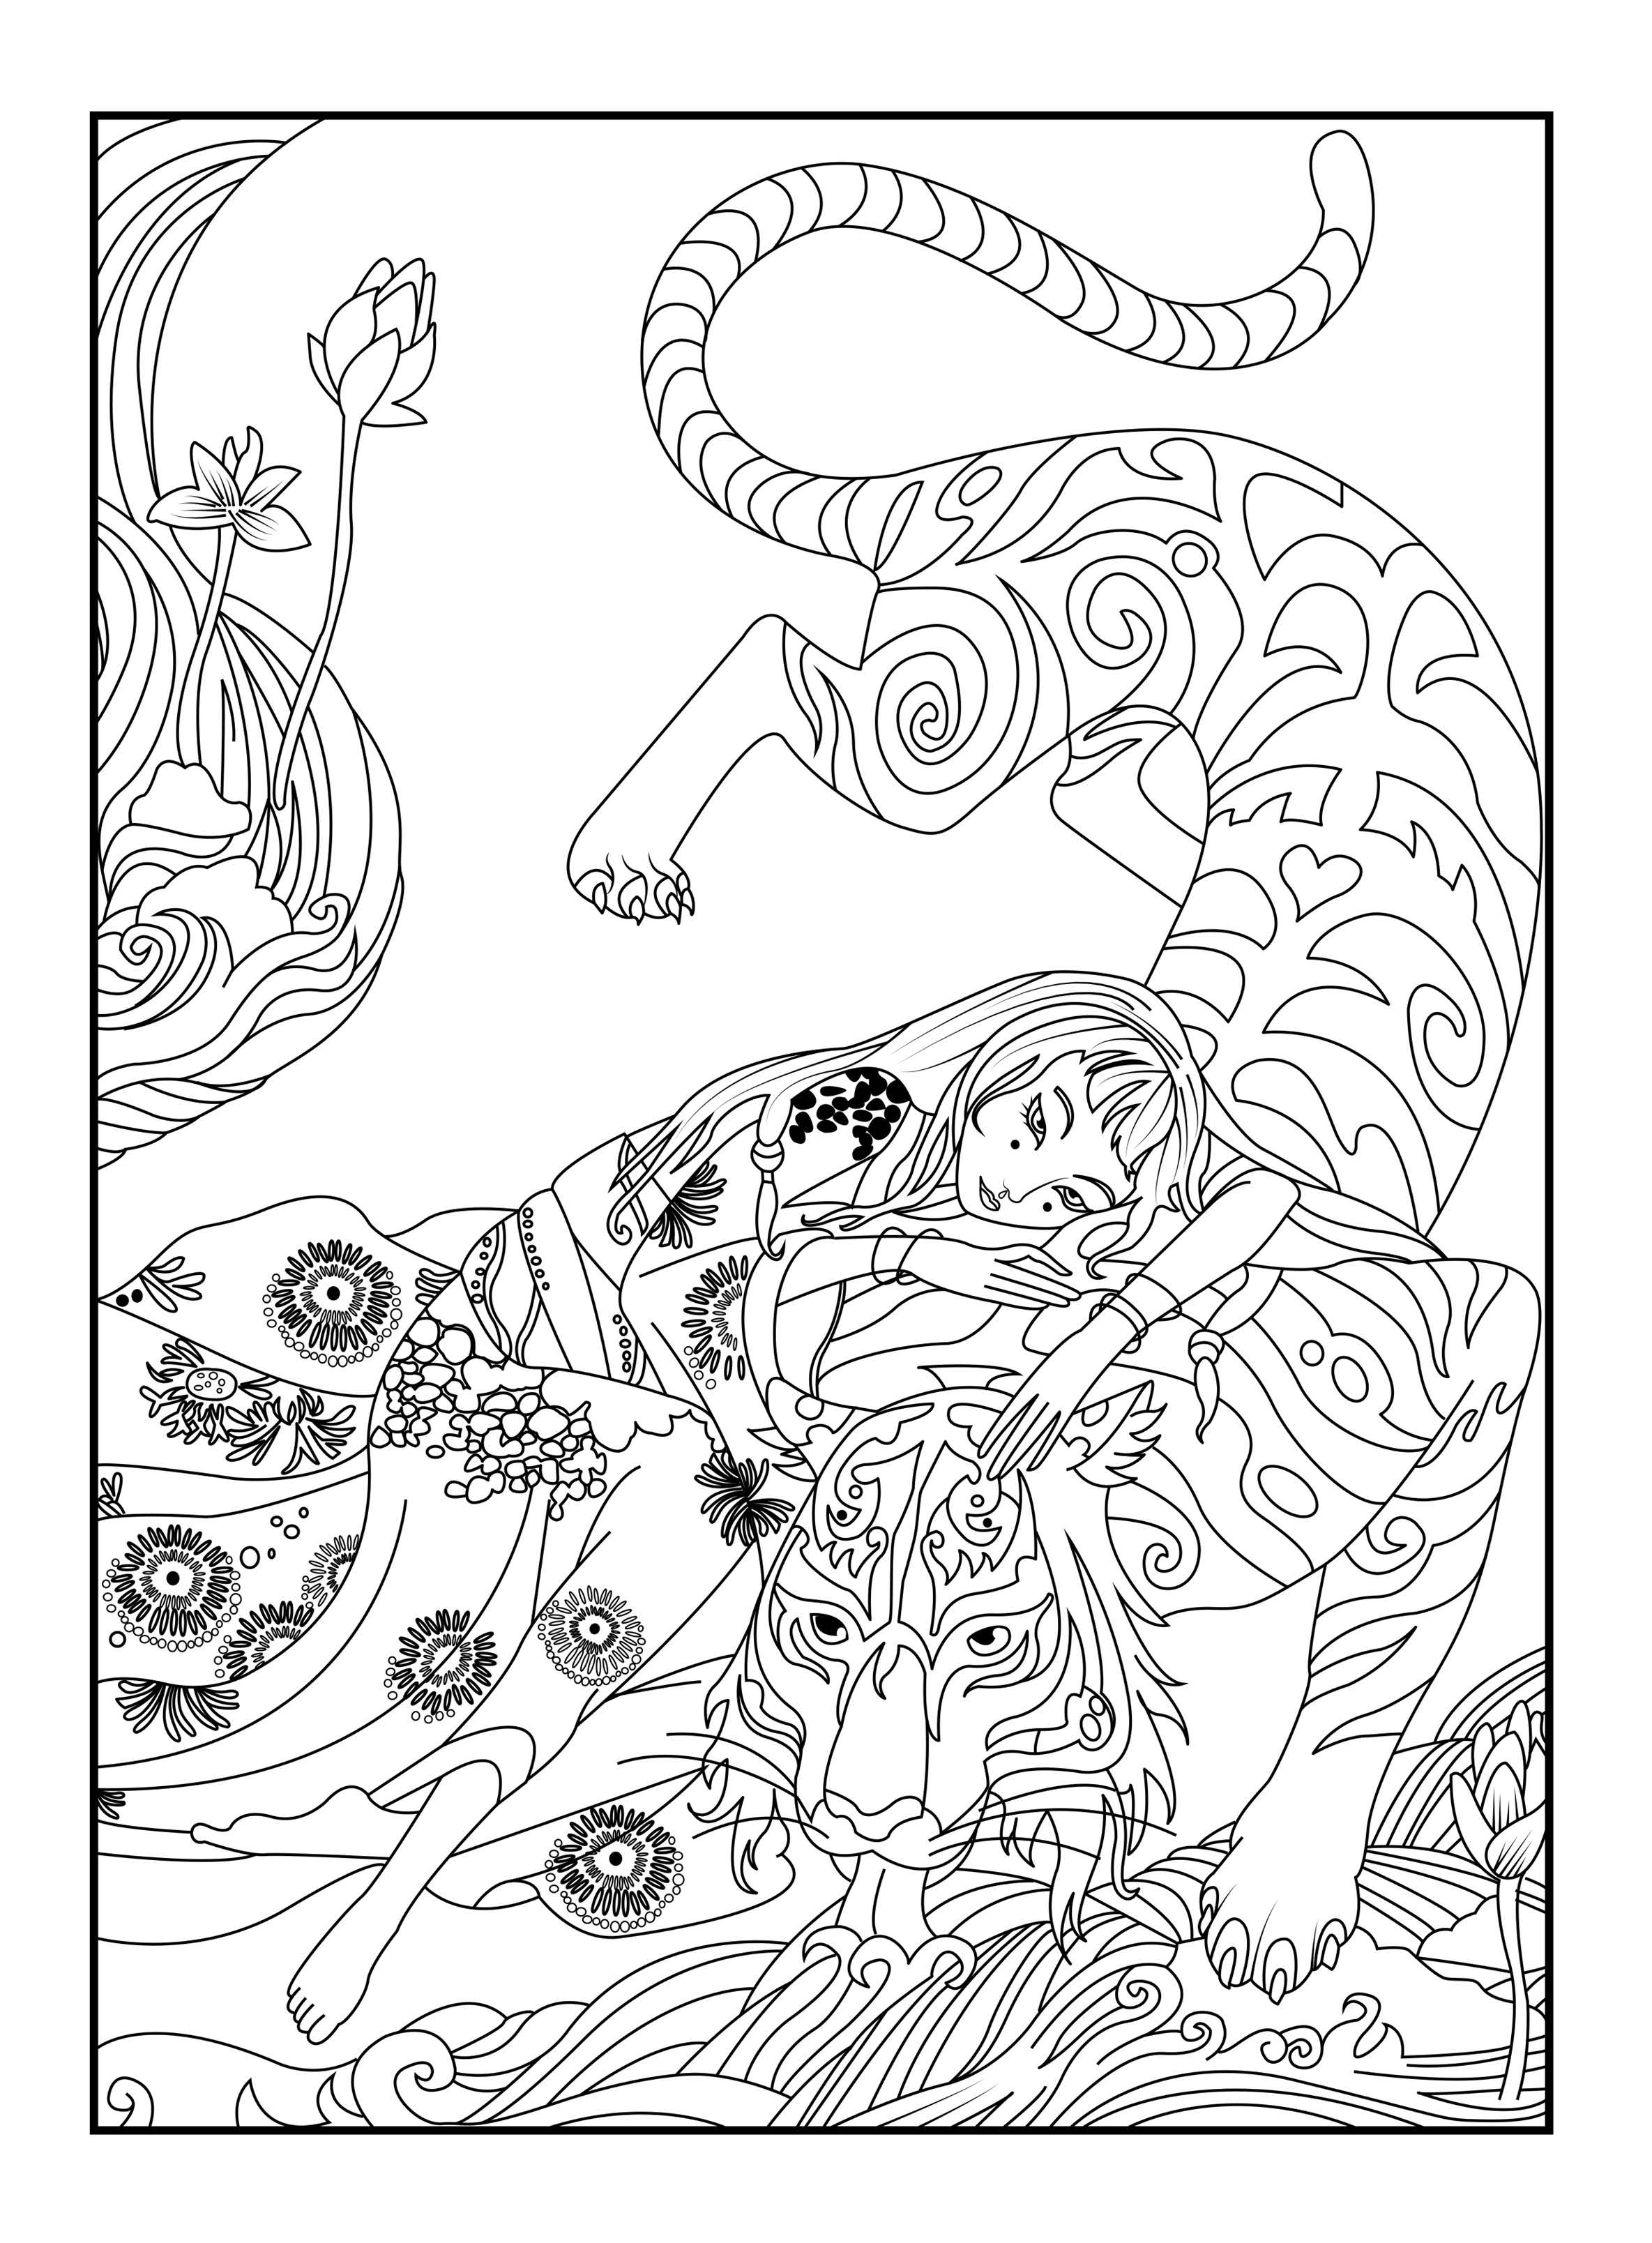 Here is a coloring page with a tiger by Céline, Artist : Celine